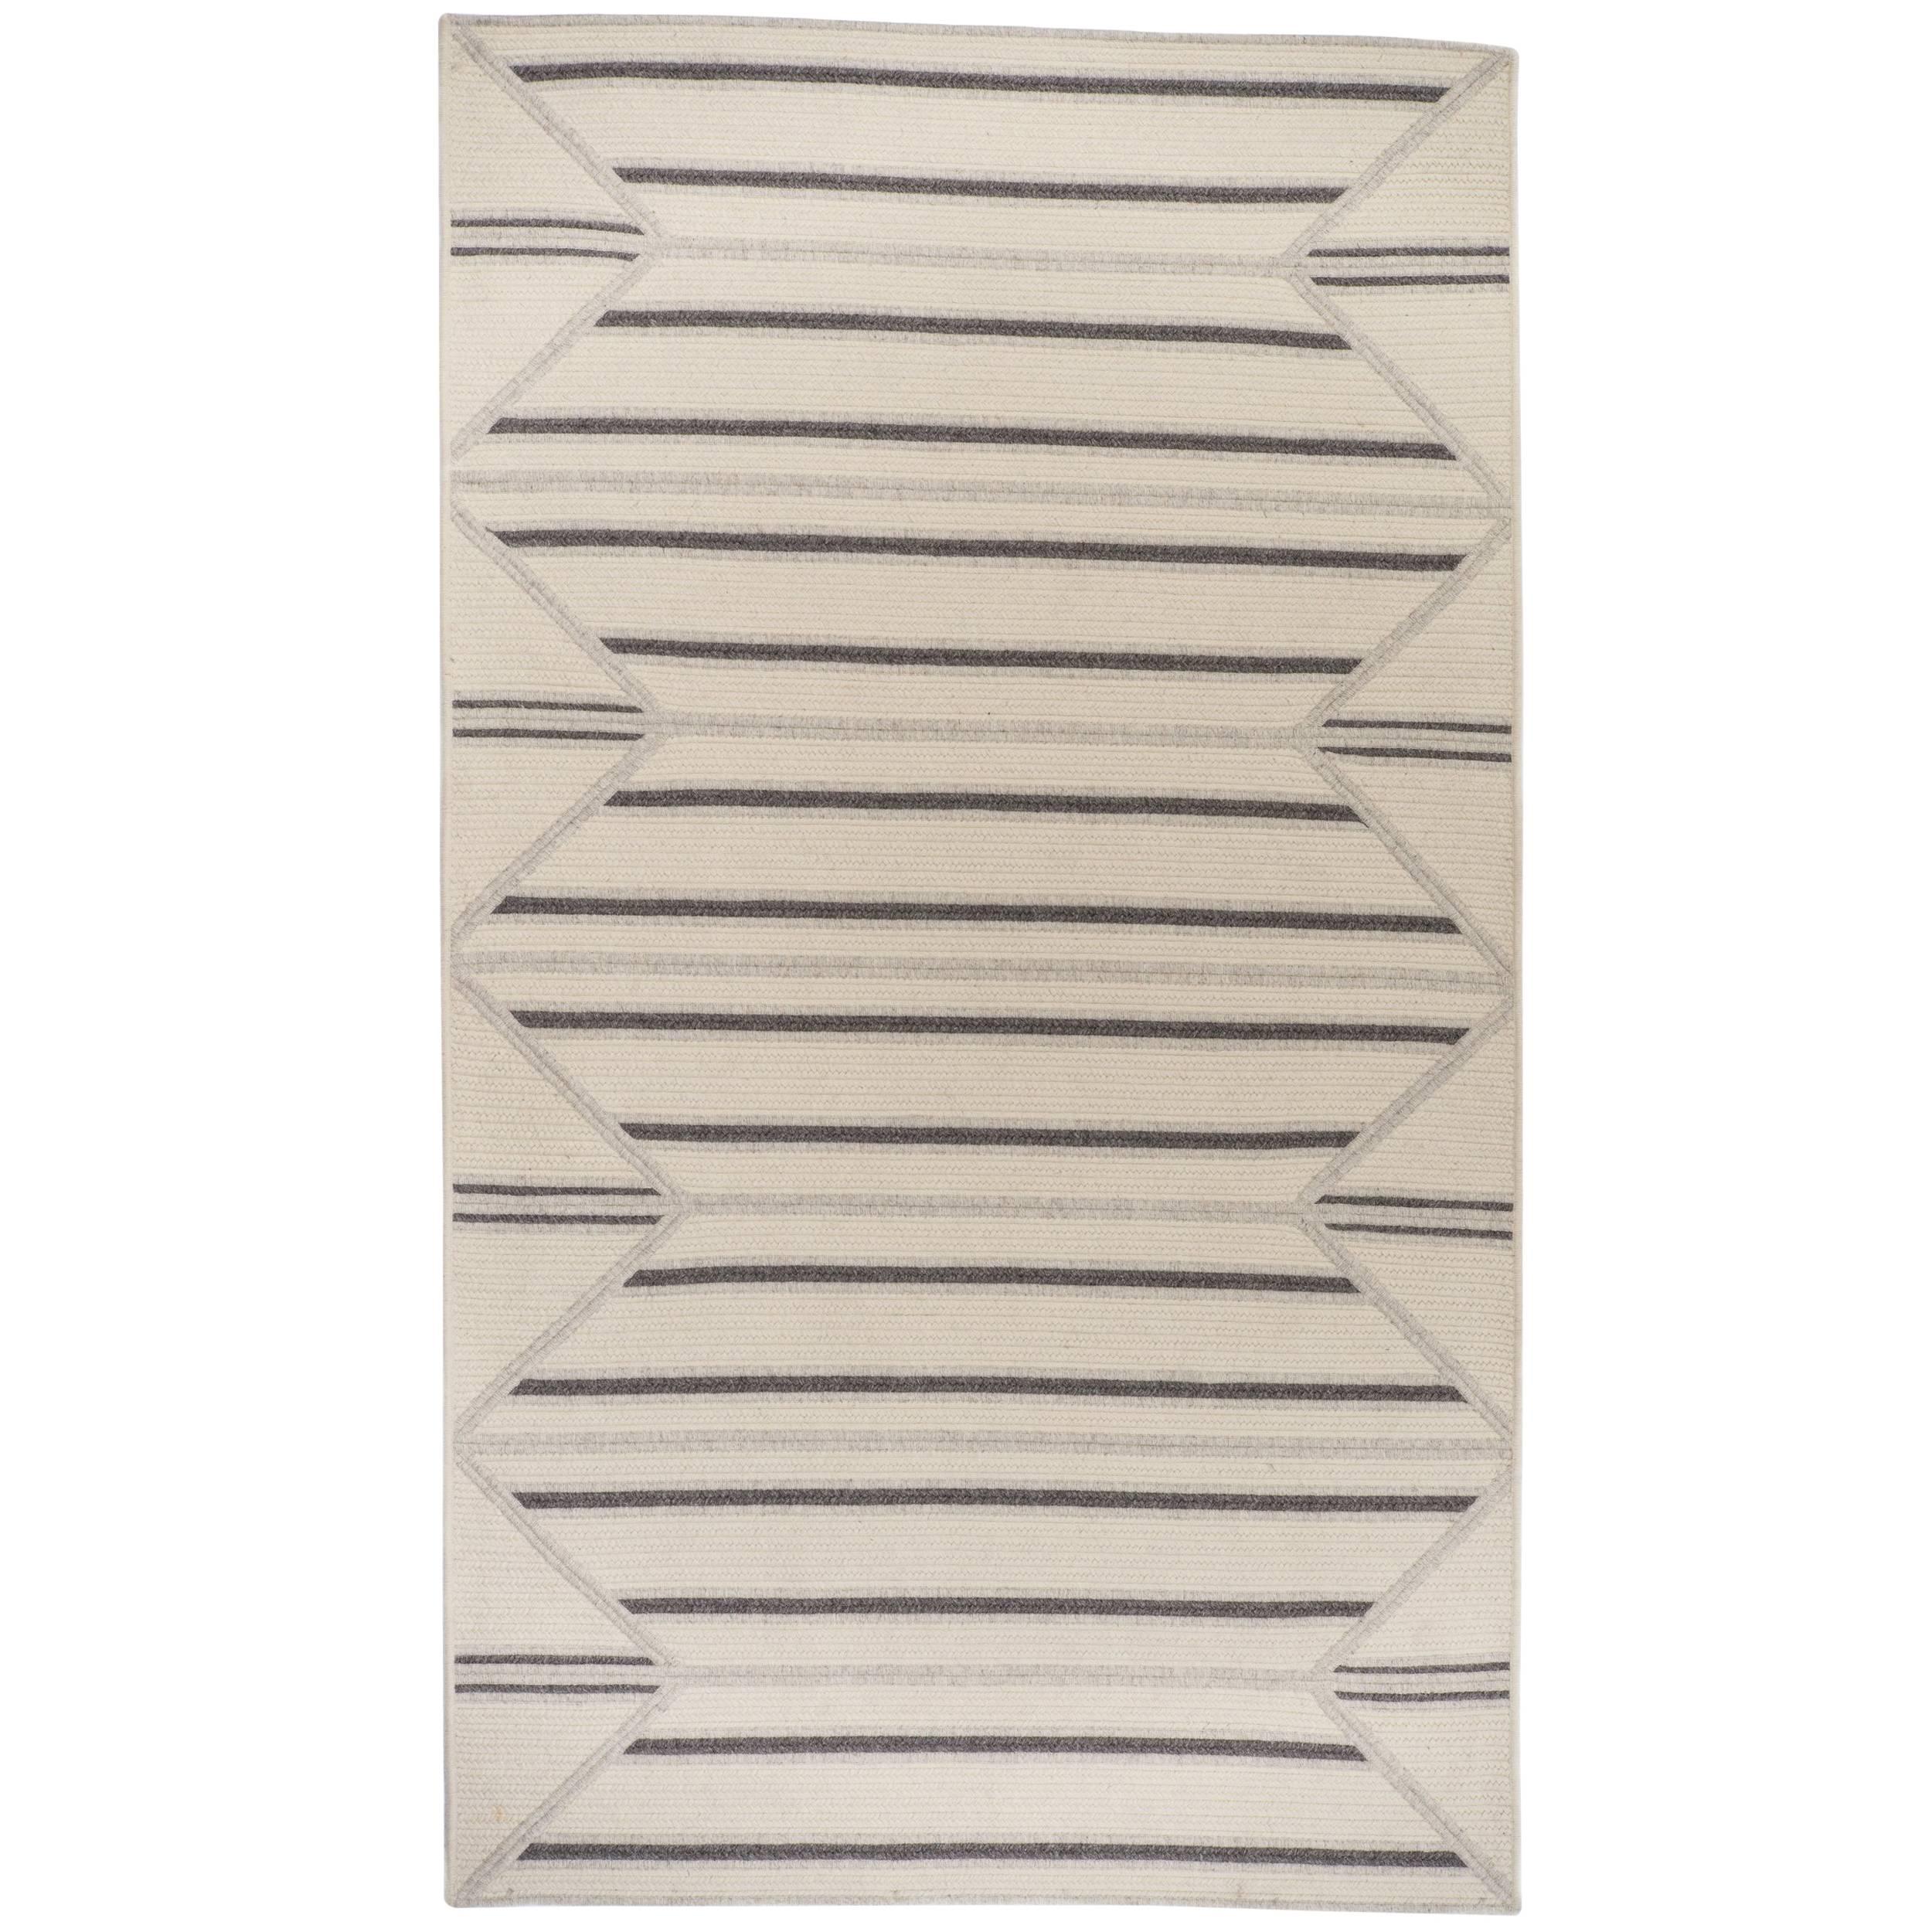 Natural Woven Wool Rug in Grey Cream, Custom Crafted in USA & Reversible, Inlay For Sale